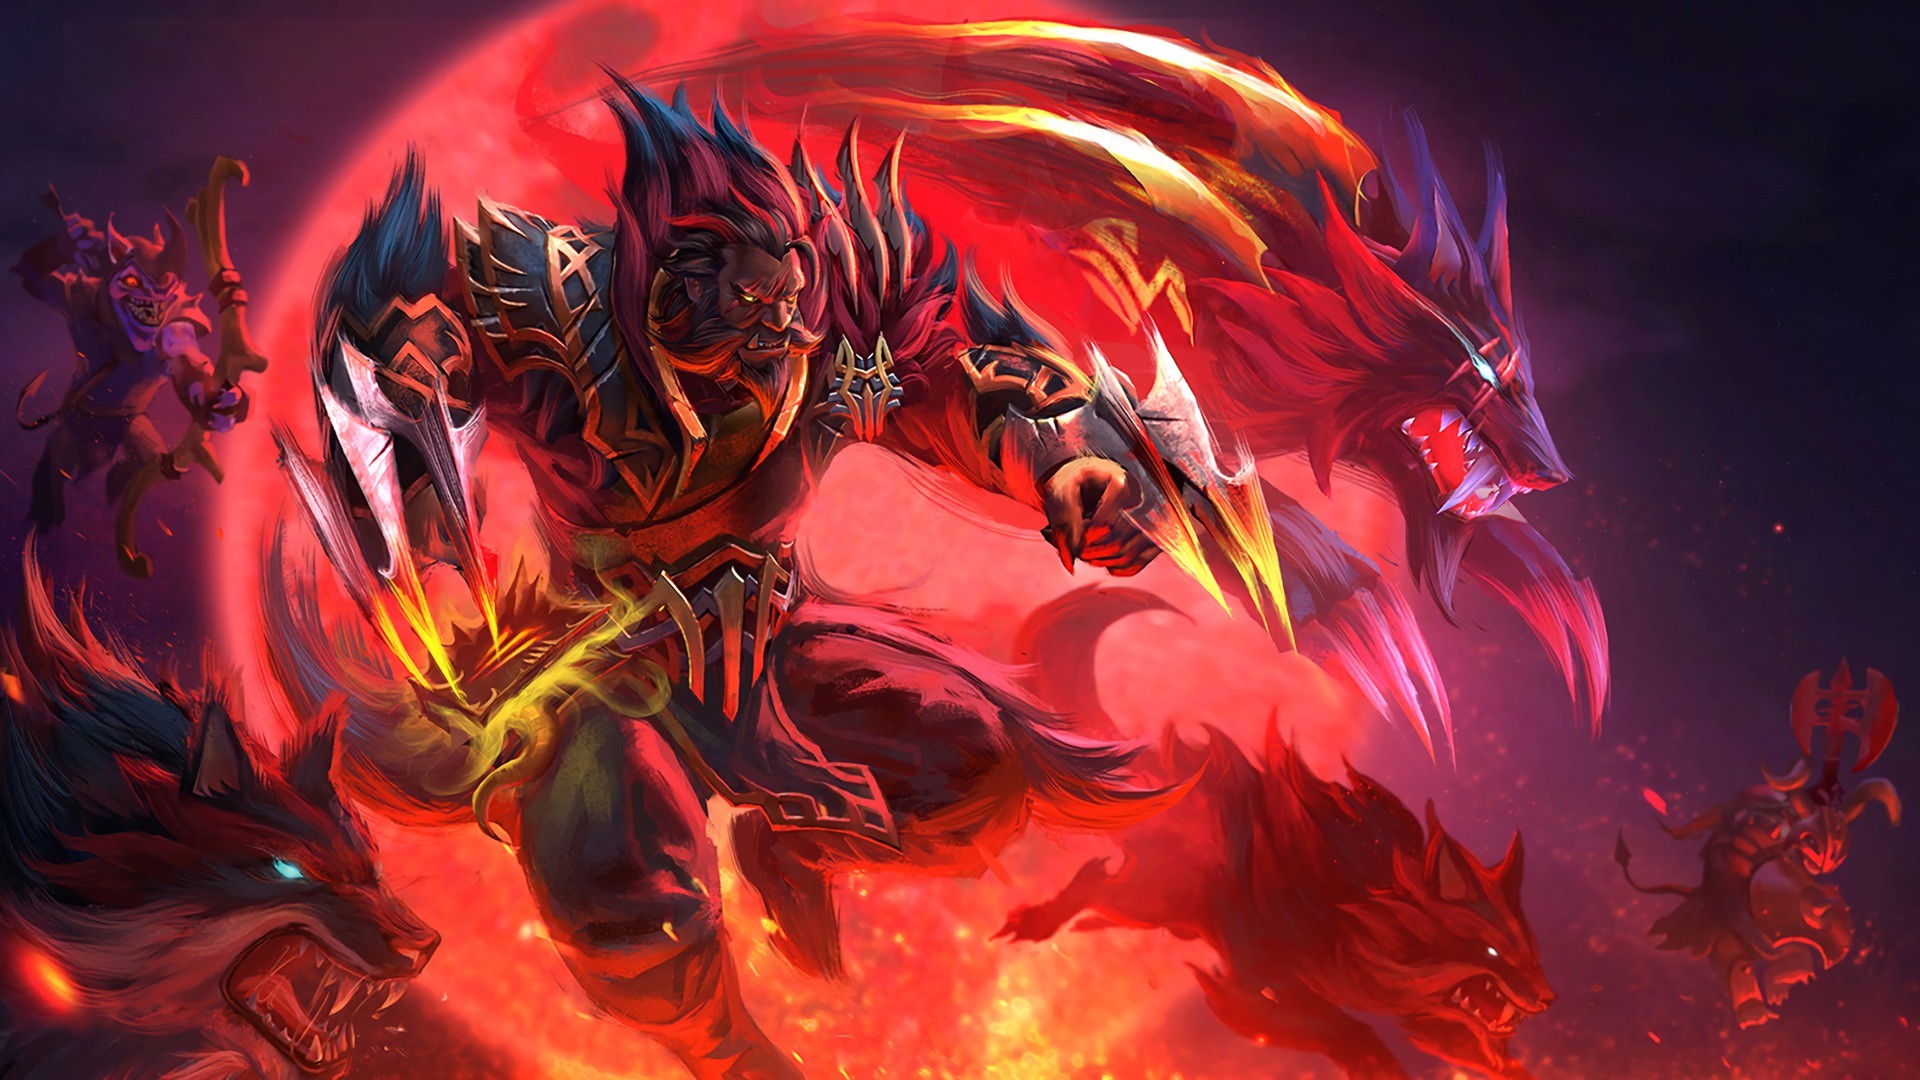 Wallpaper Lycan, Defense of The Ancients 2, DOTA 2 video game